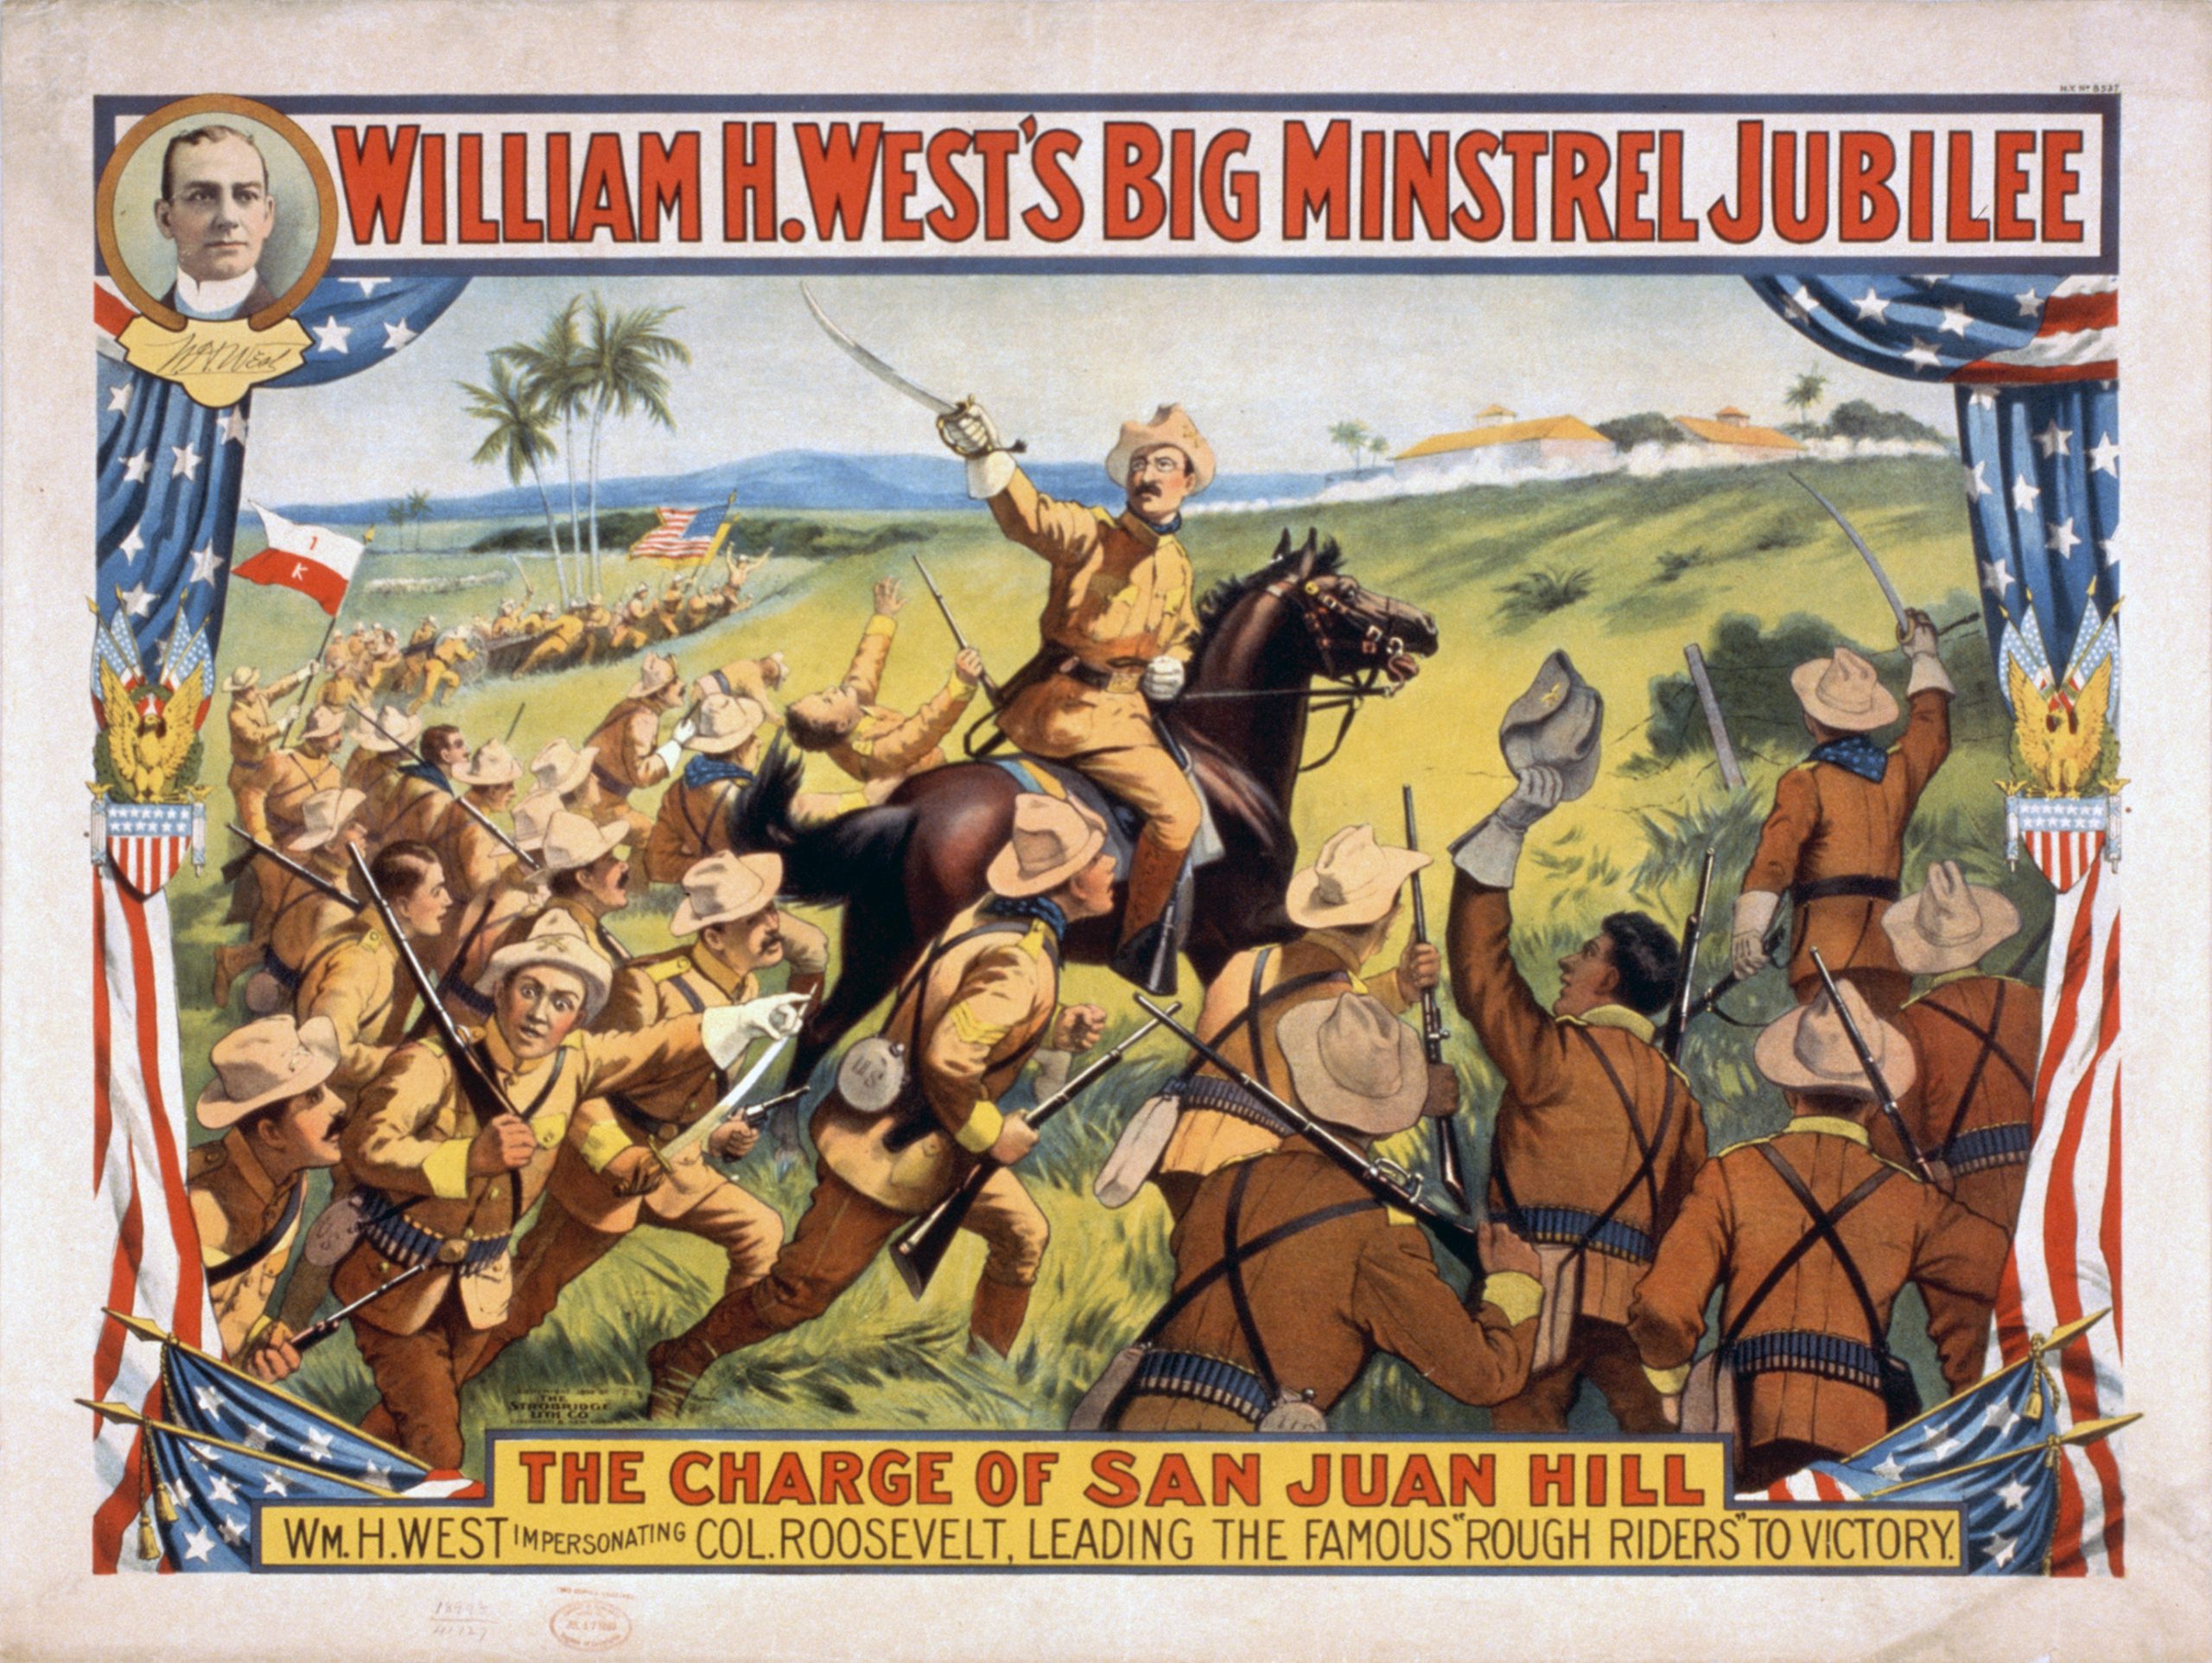 Charge of San Juan Hill